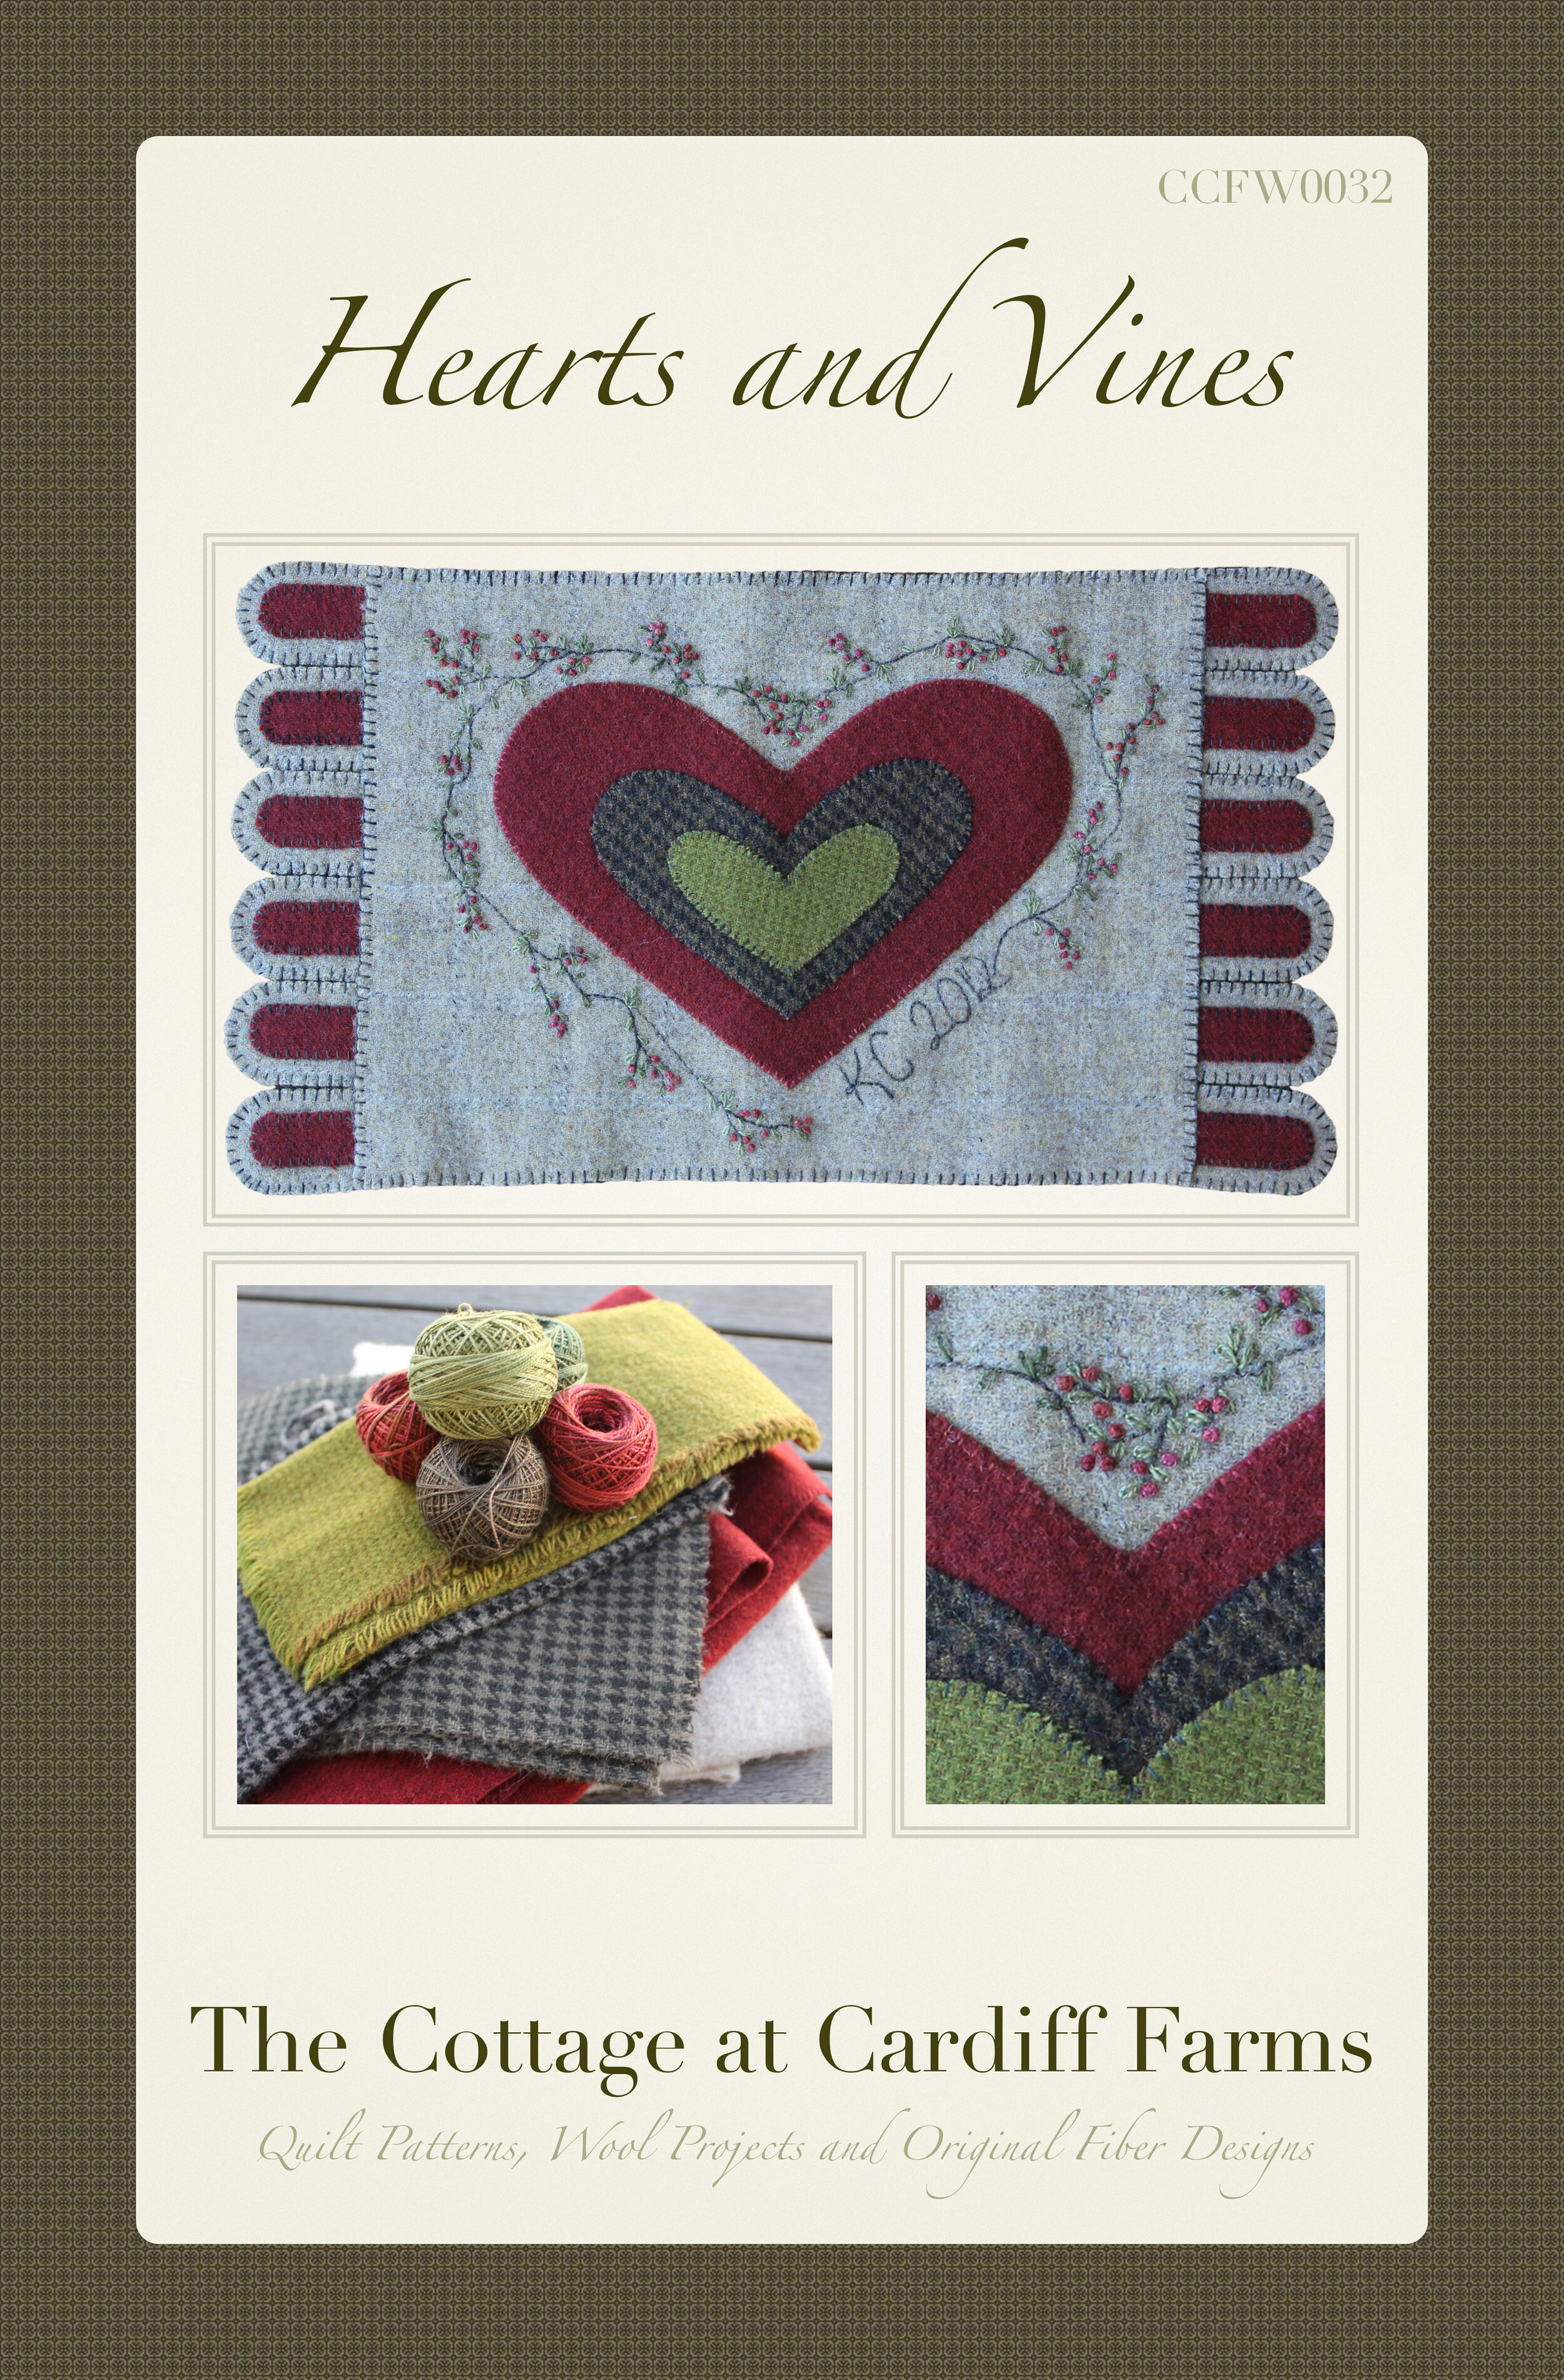 Hearts and Vines Pattern Cover.jpg